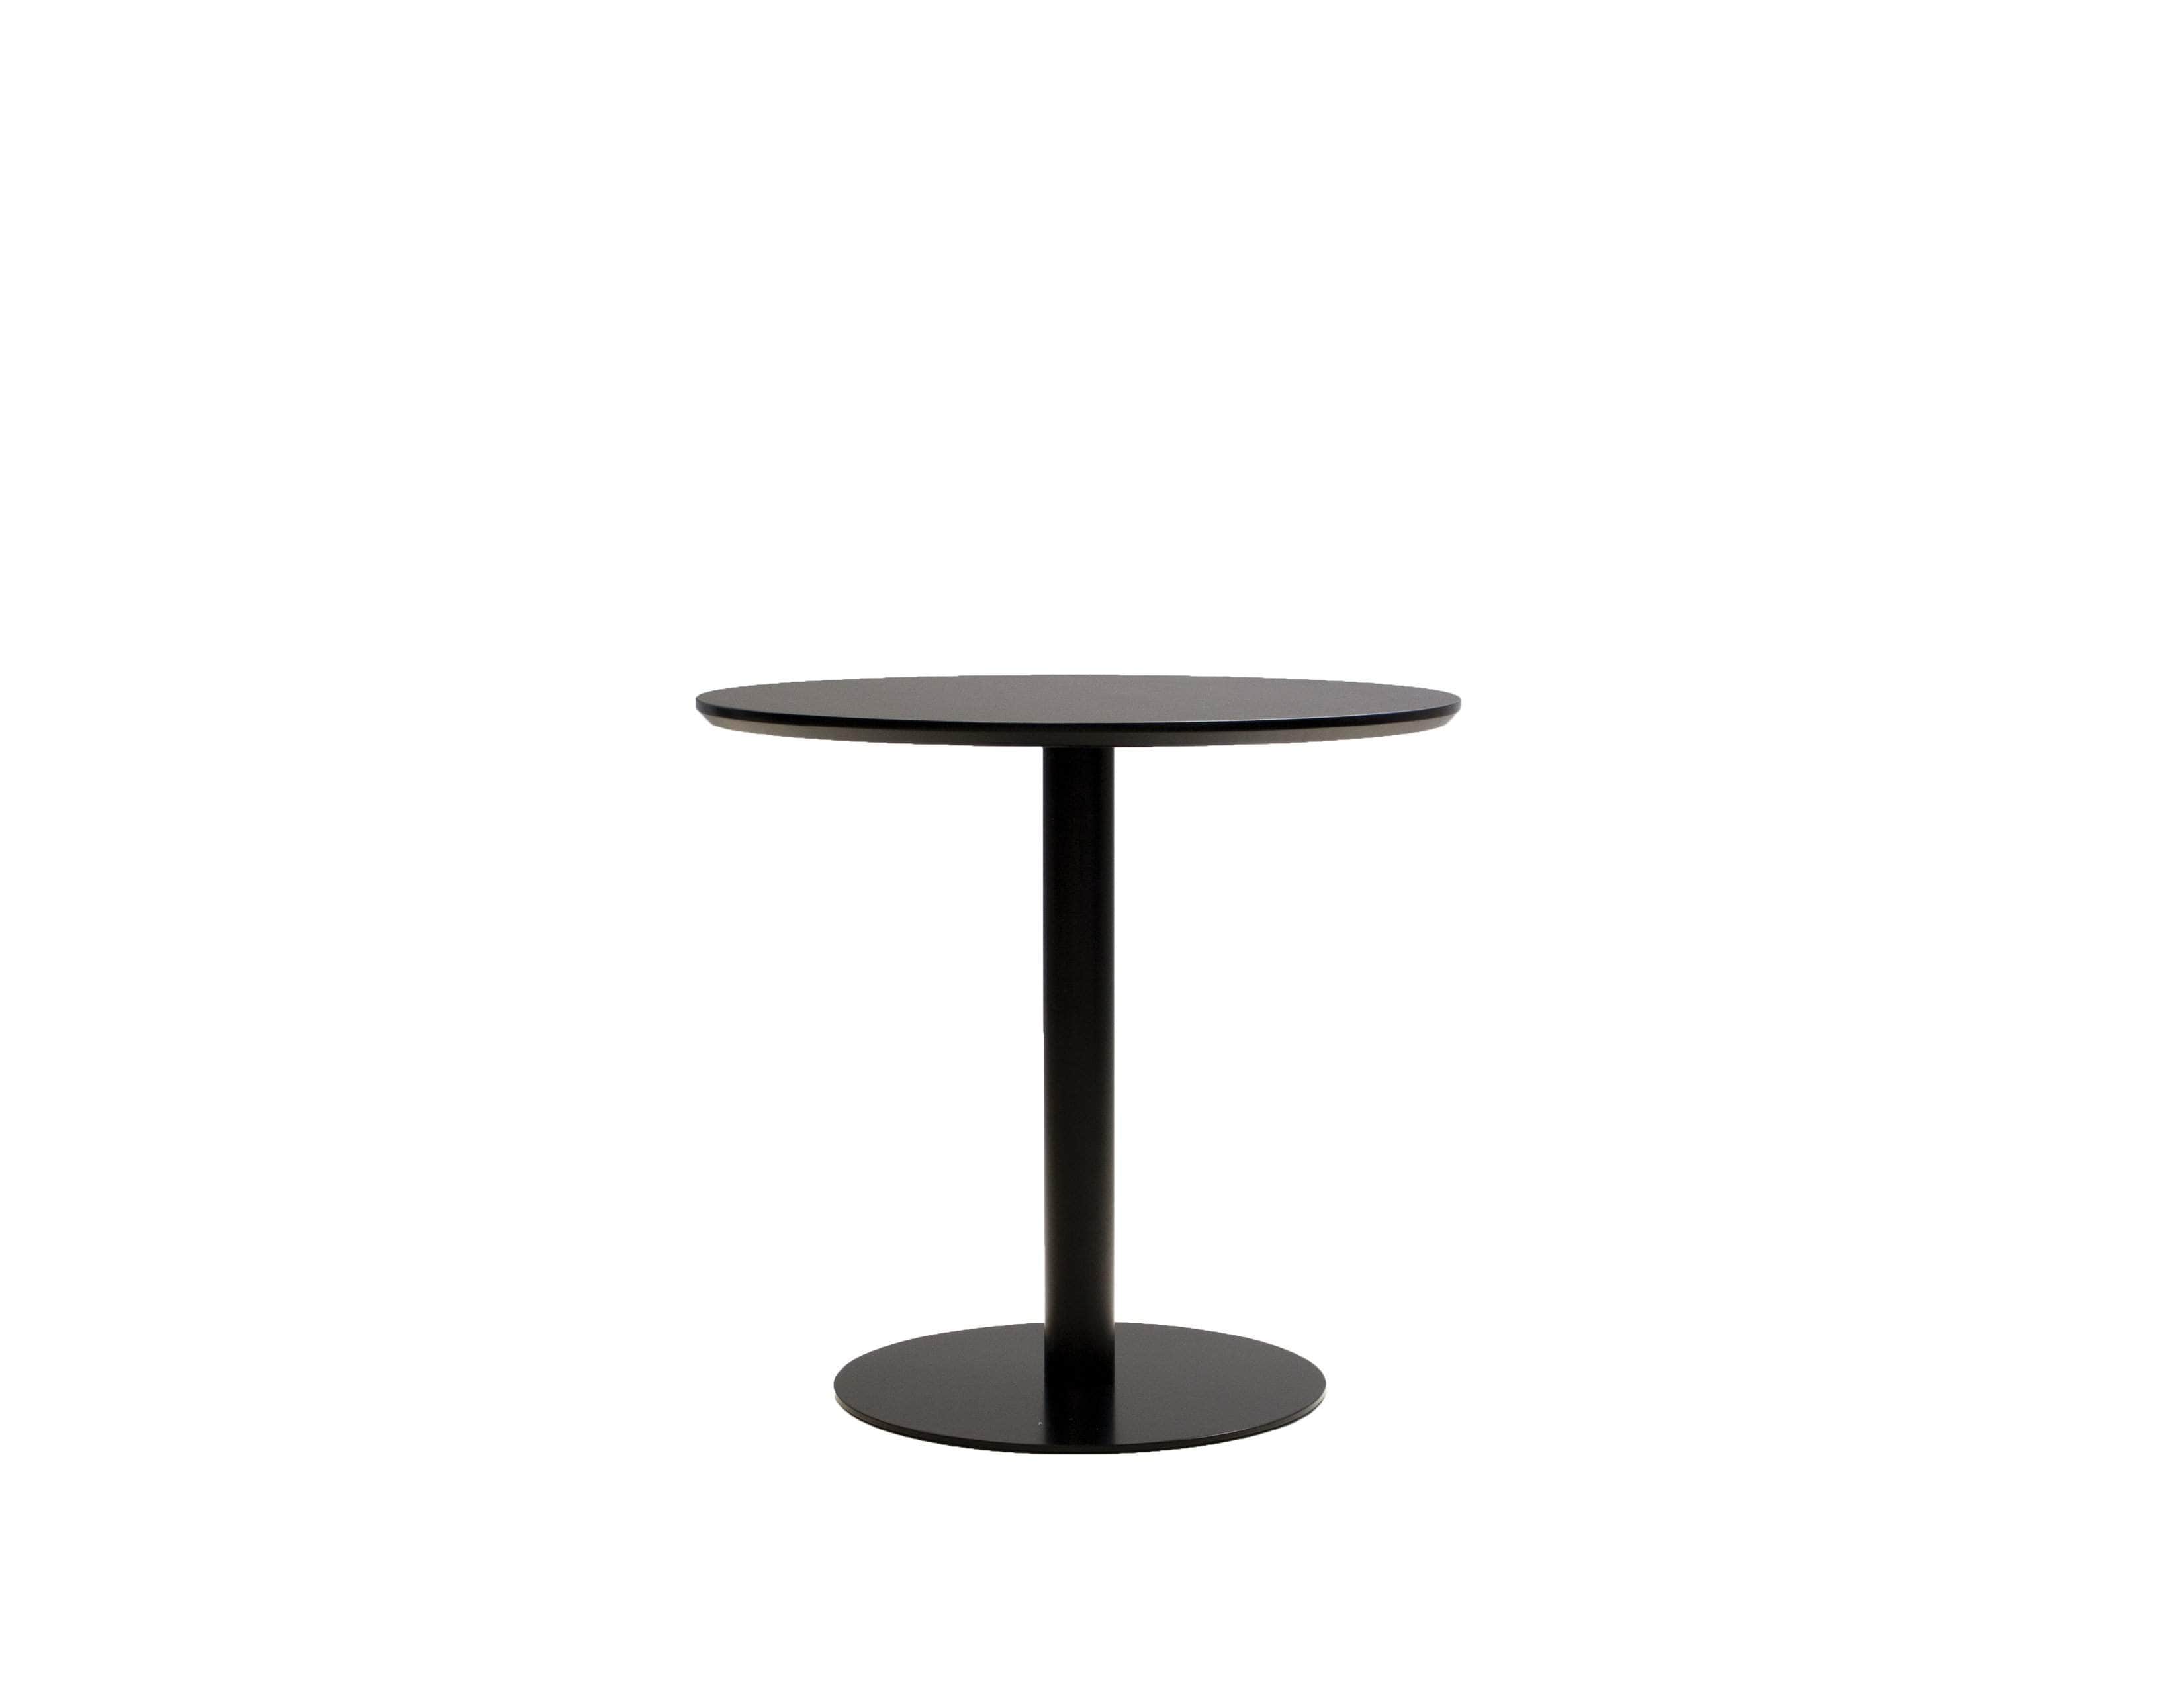 Half Pint 31.5" Diameter Round Dining Table with Black Top and Black Powder Coated Steel Frame